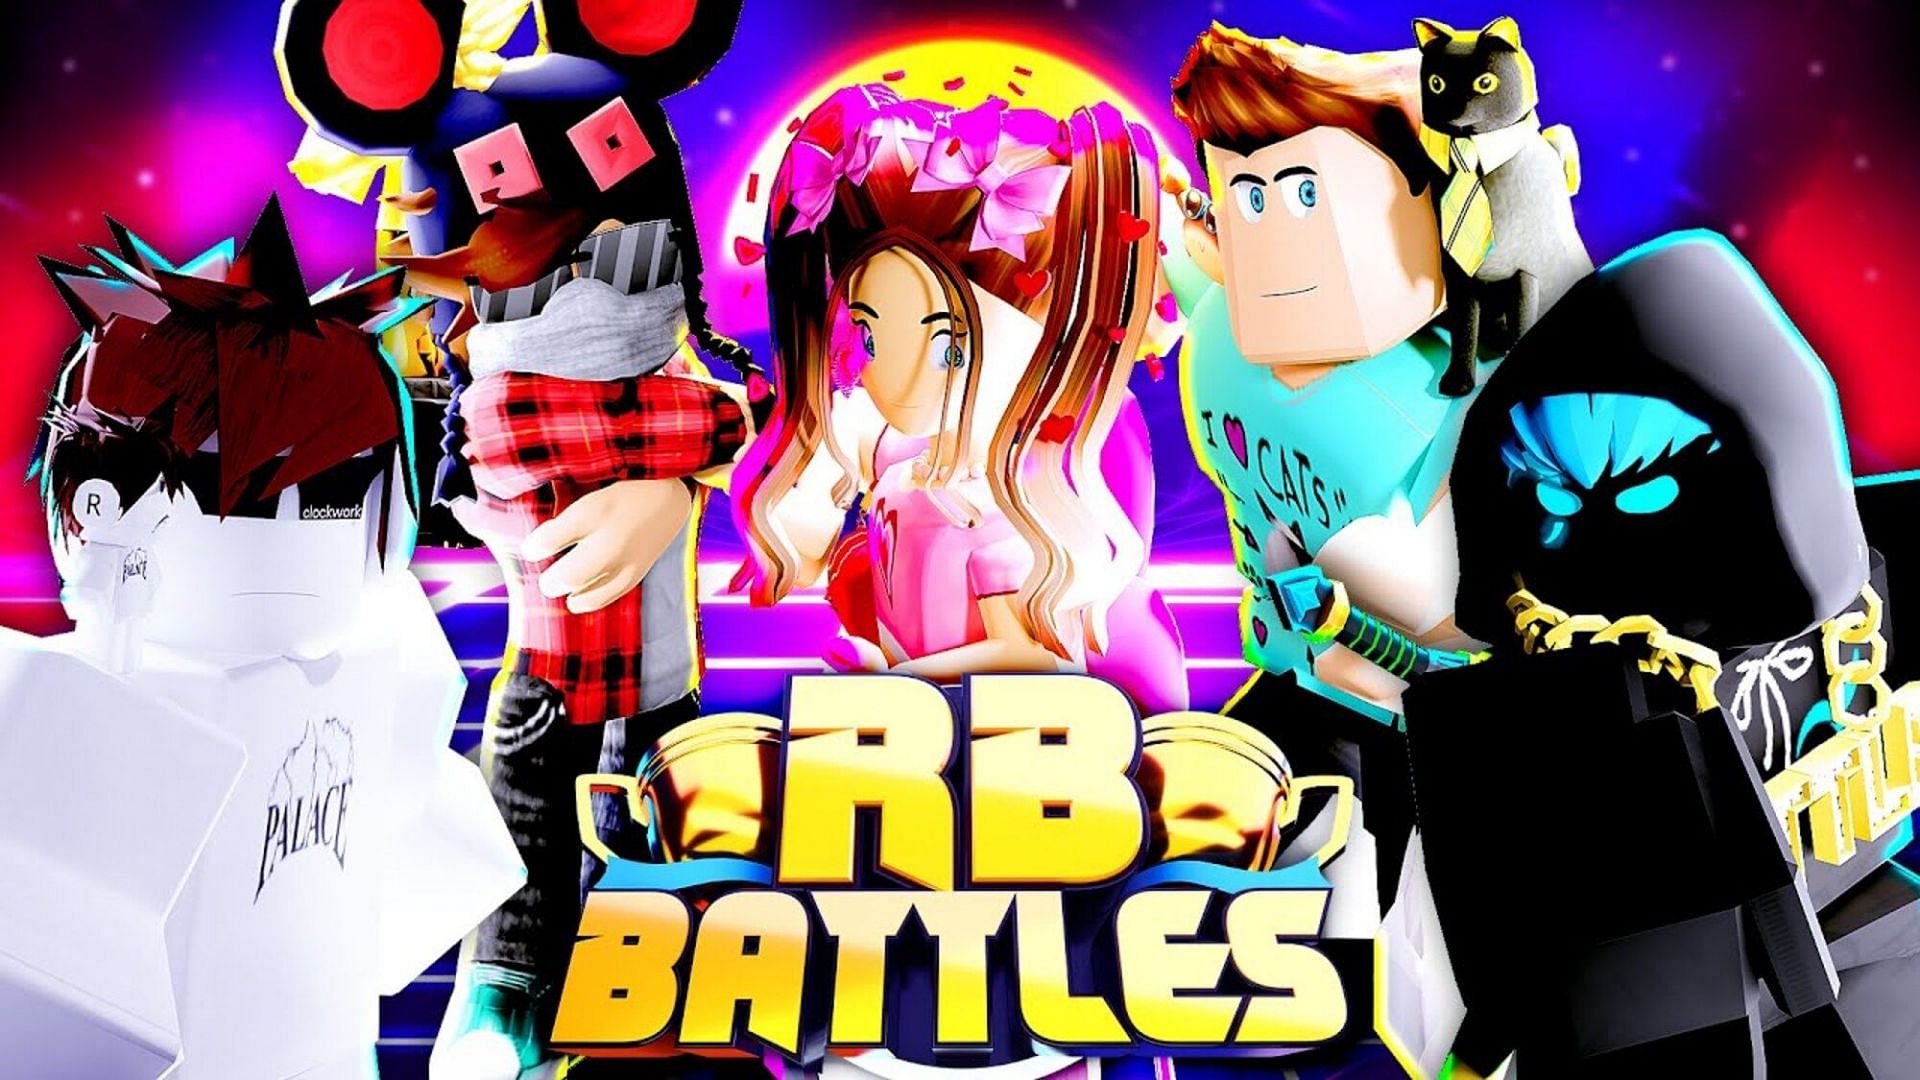 Featured image of the grand finale (Image via Roblox Battles) 